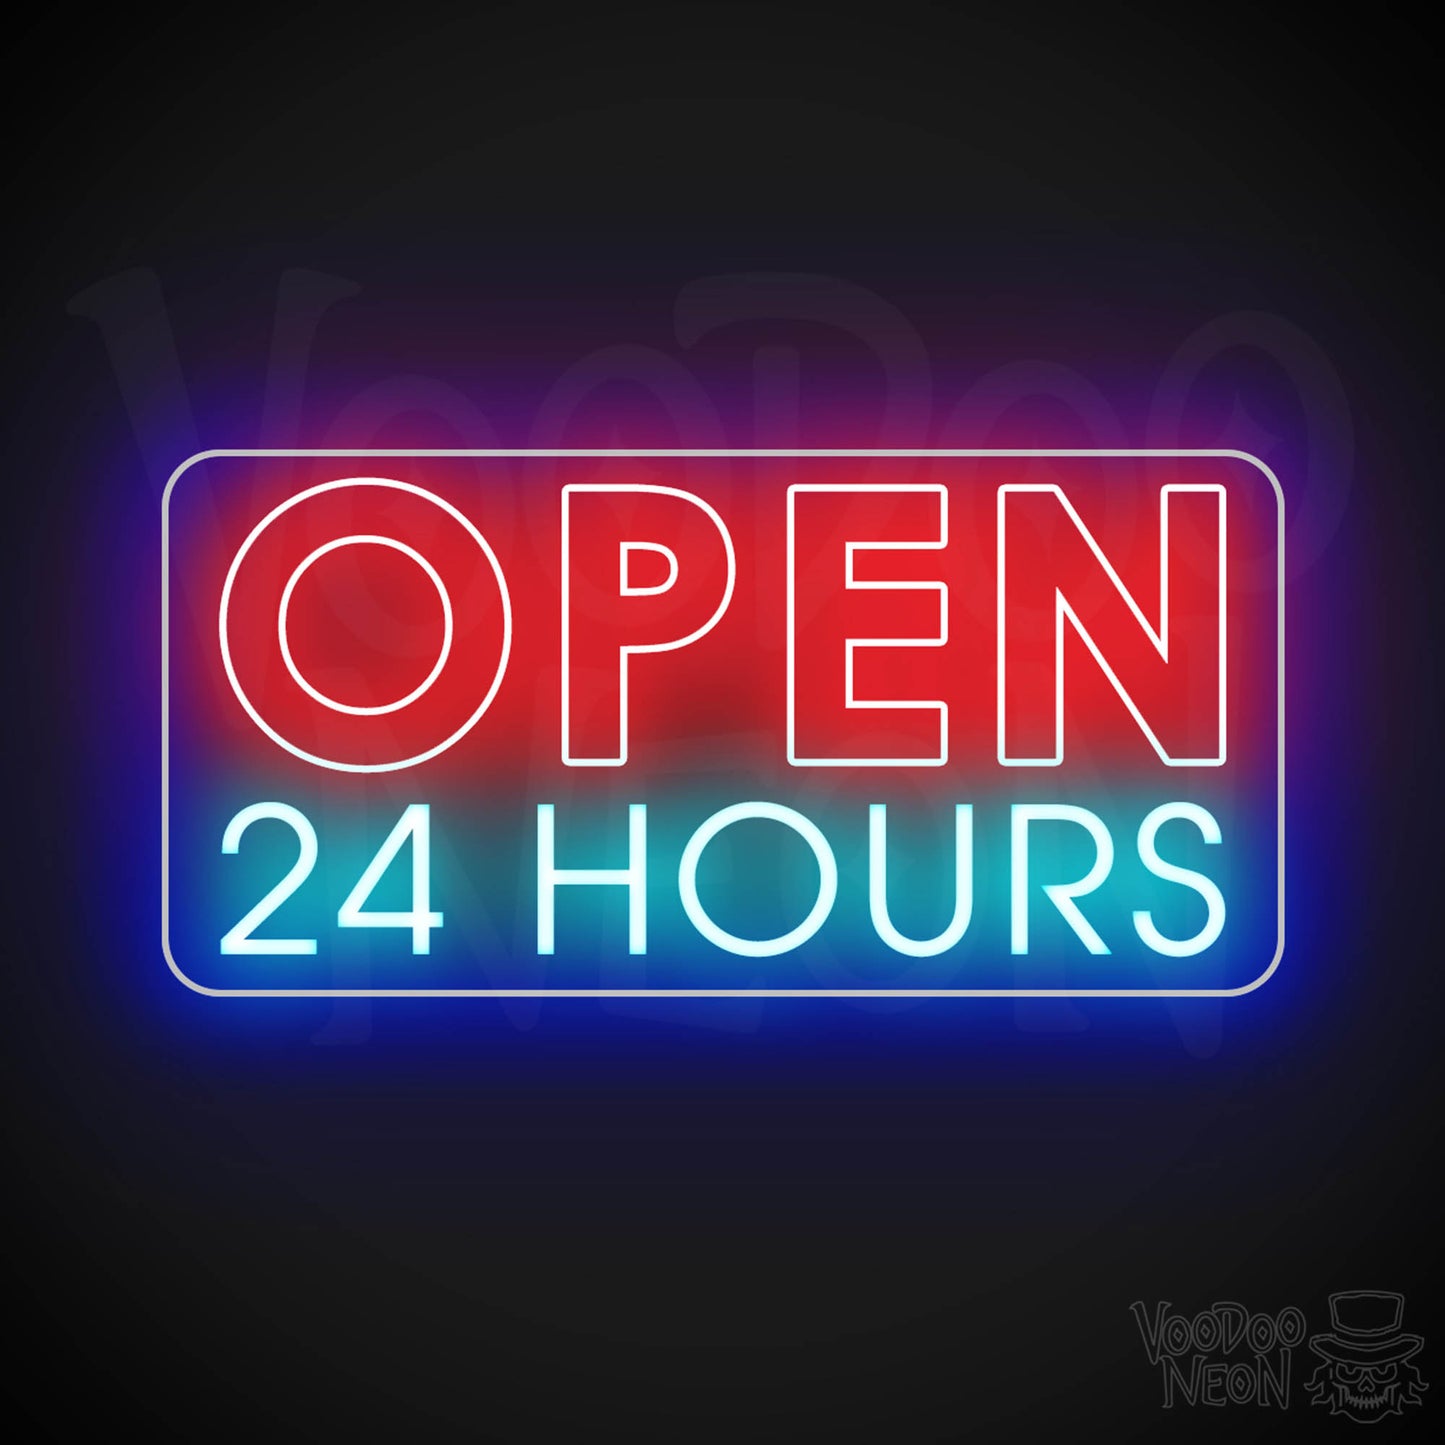 Open 24 Hours Neon Sign - Neon Open 24 Hours Sign - Shop Signs - Color Multi-Color